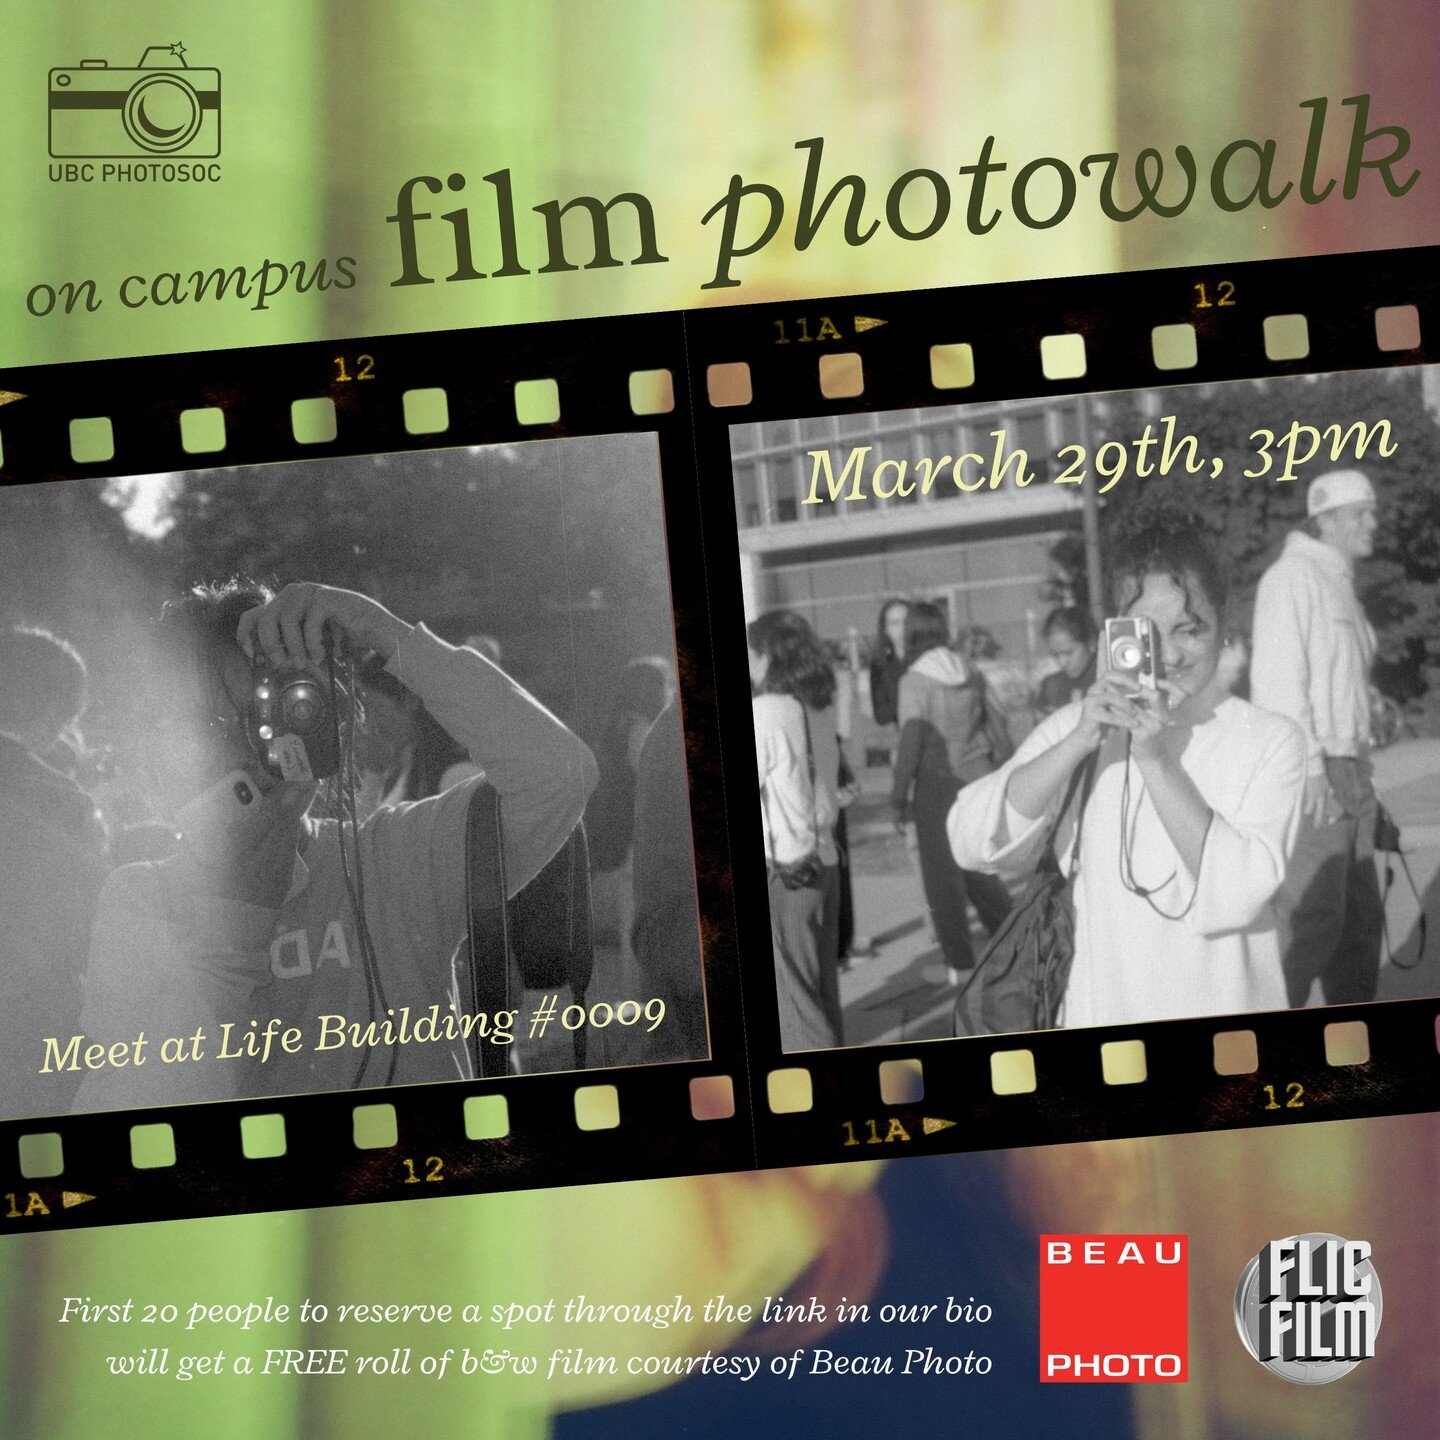 Join us for another UBC PhotoSoc PhotoWalk!

UBC PHOTOSOC MEMBERS: RSVP (link in bio) for a free roll of film to use on the walk -- courtesy of Beau Photos and Flic Film! 🎞️

But don&rsquo;t forget to BYOFC -- bring your own film camera ;-) 📸

Firs